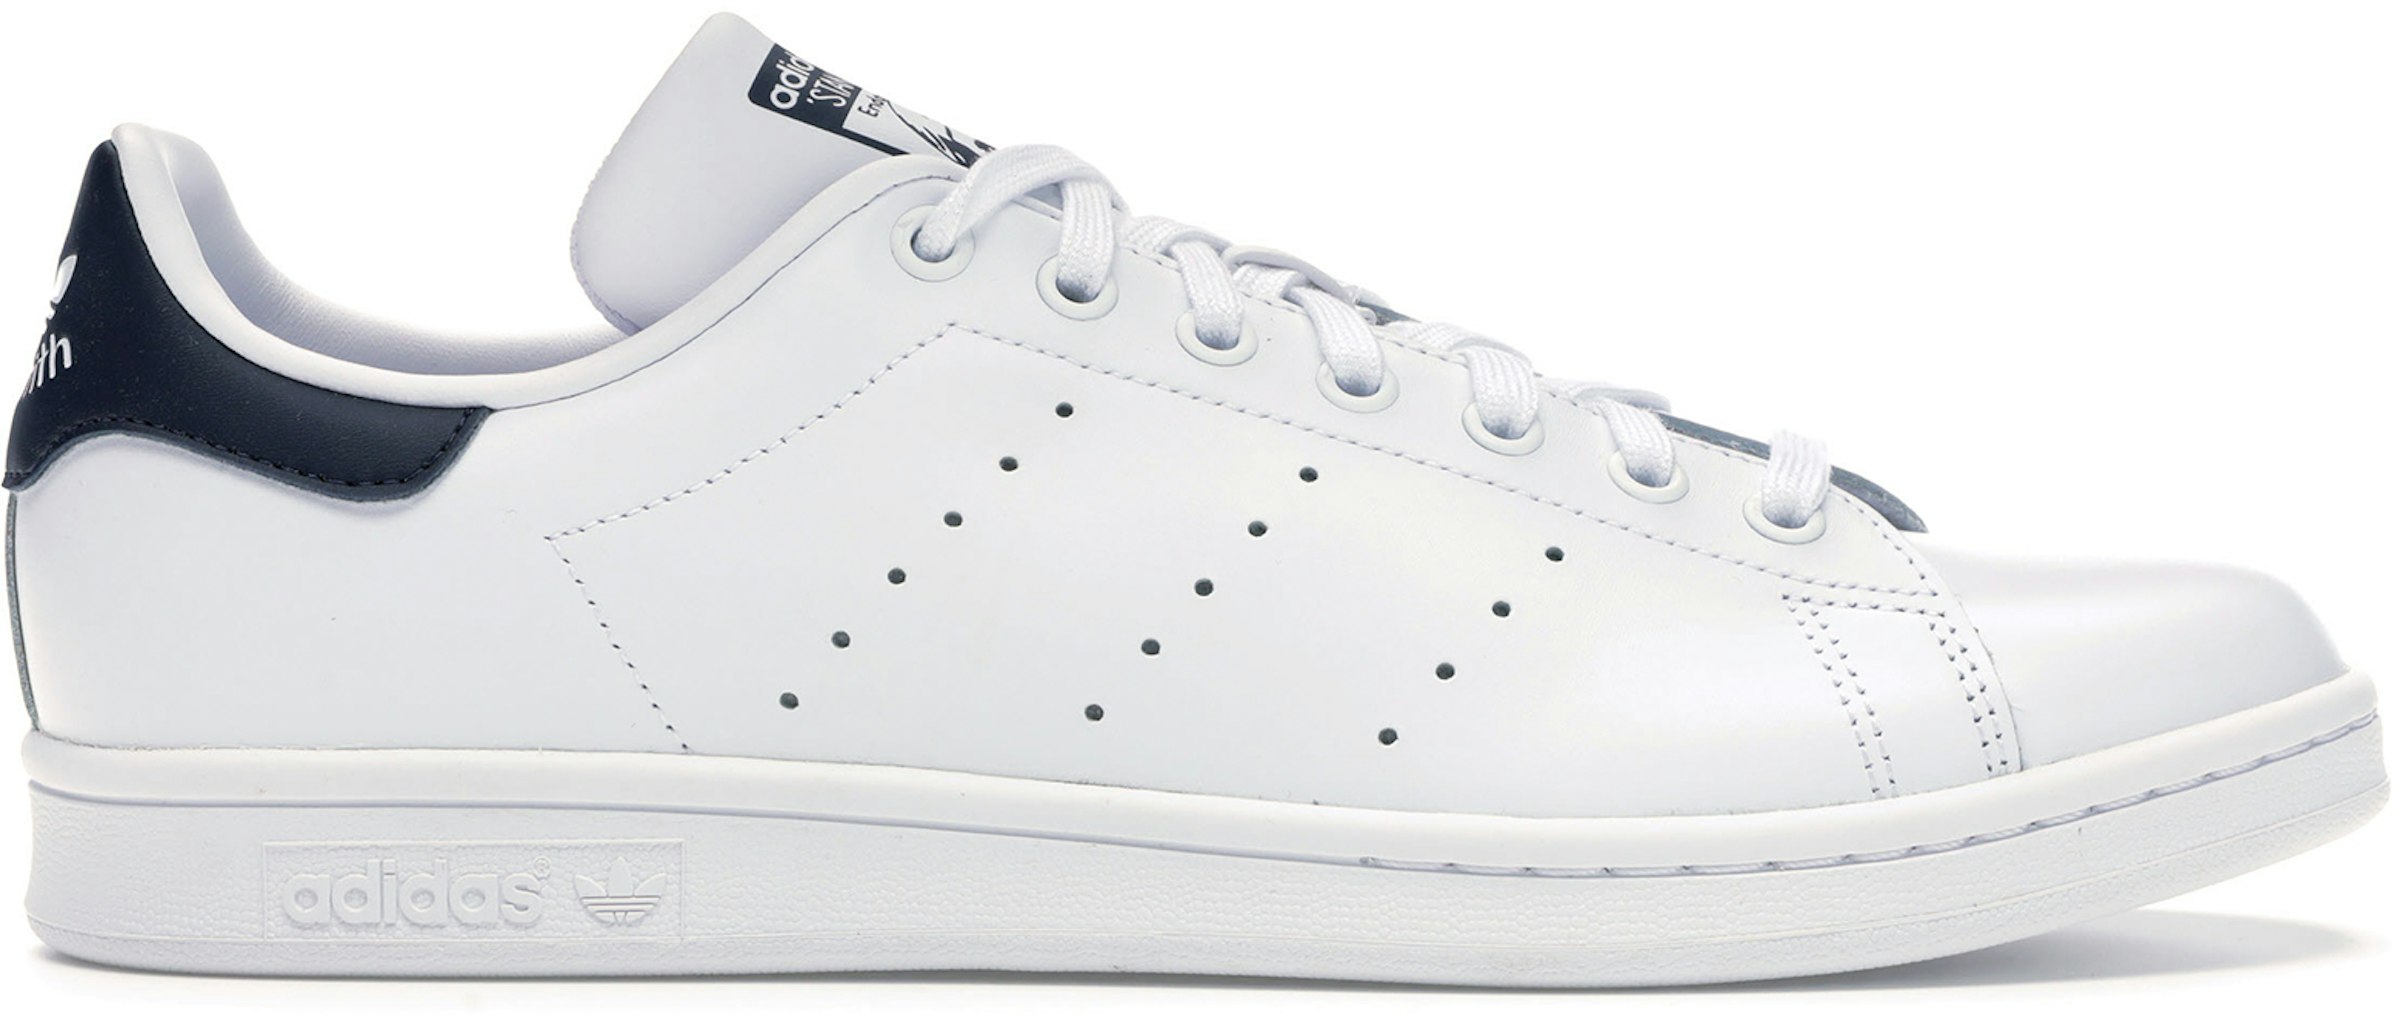 ildsted cyklus innovation Buy Adidas Stan Smith for Men and Women